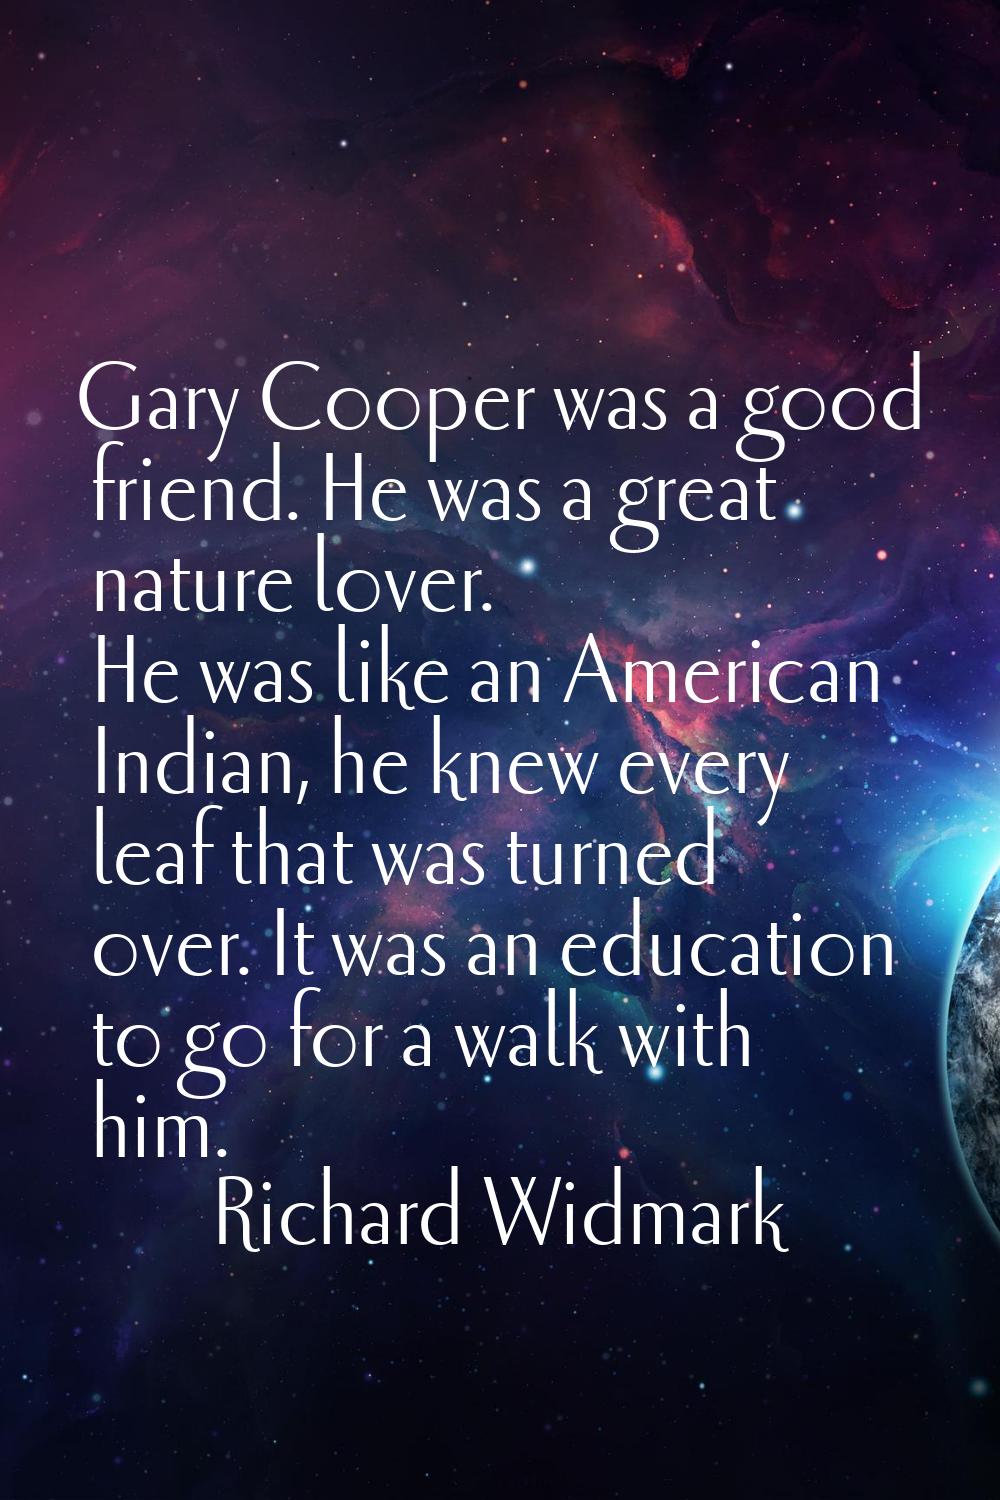 Gary Cooper was a good friend. He was a great nature lover. He was like an American Indian, he knew